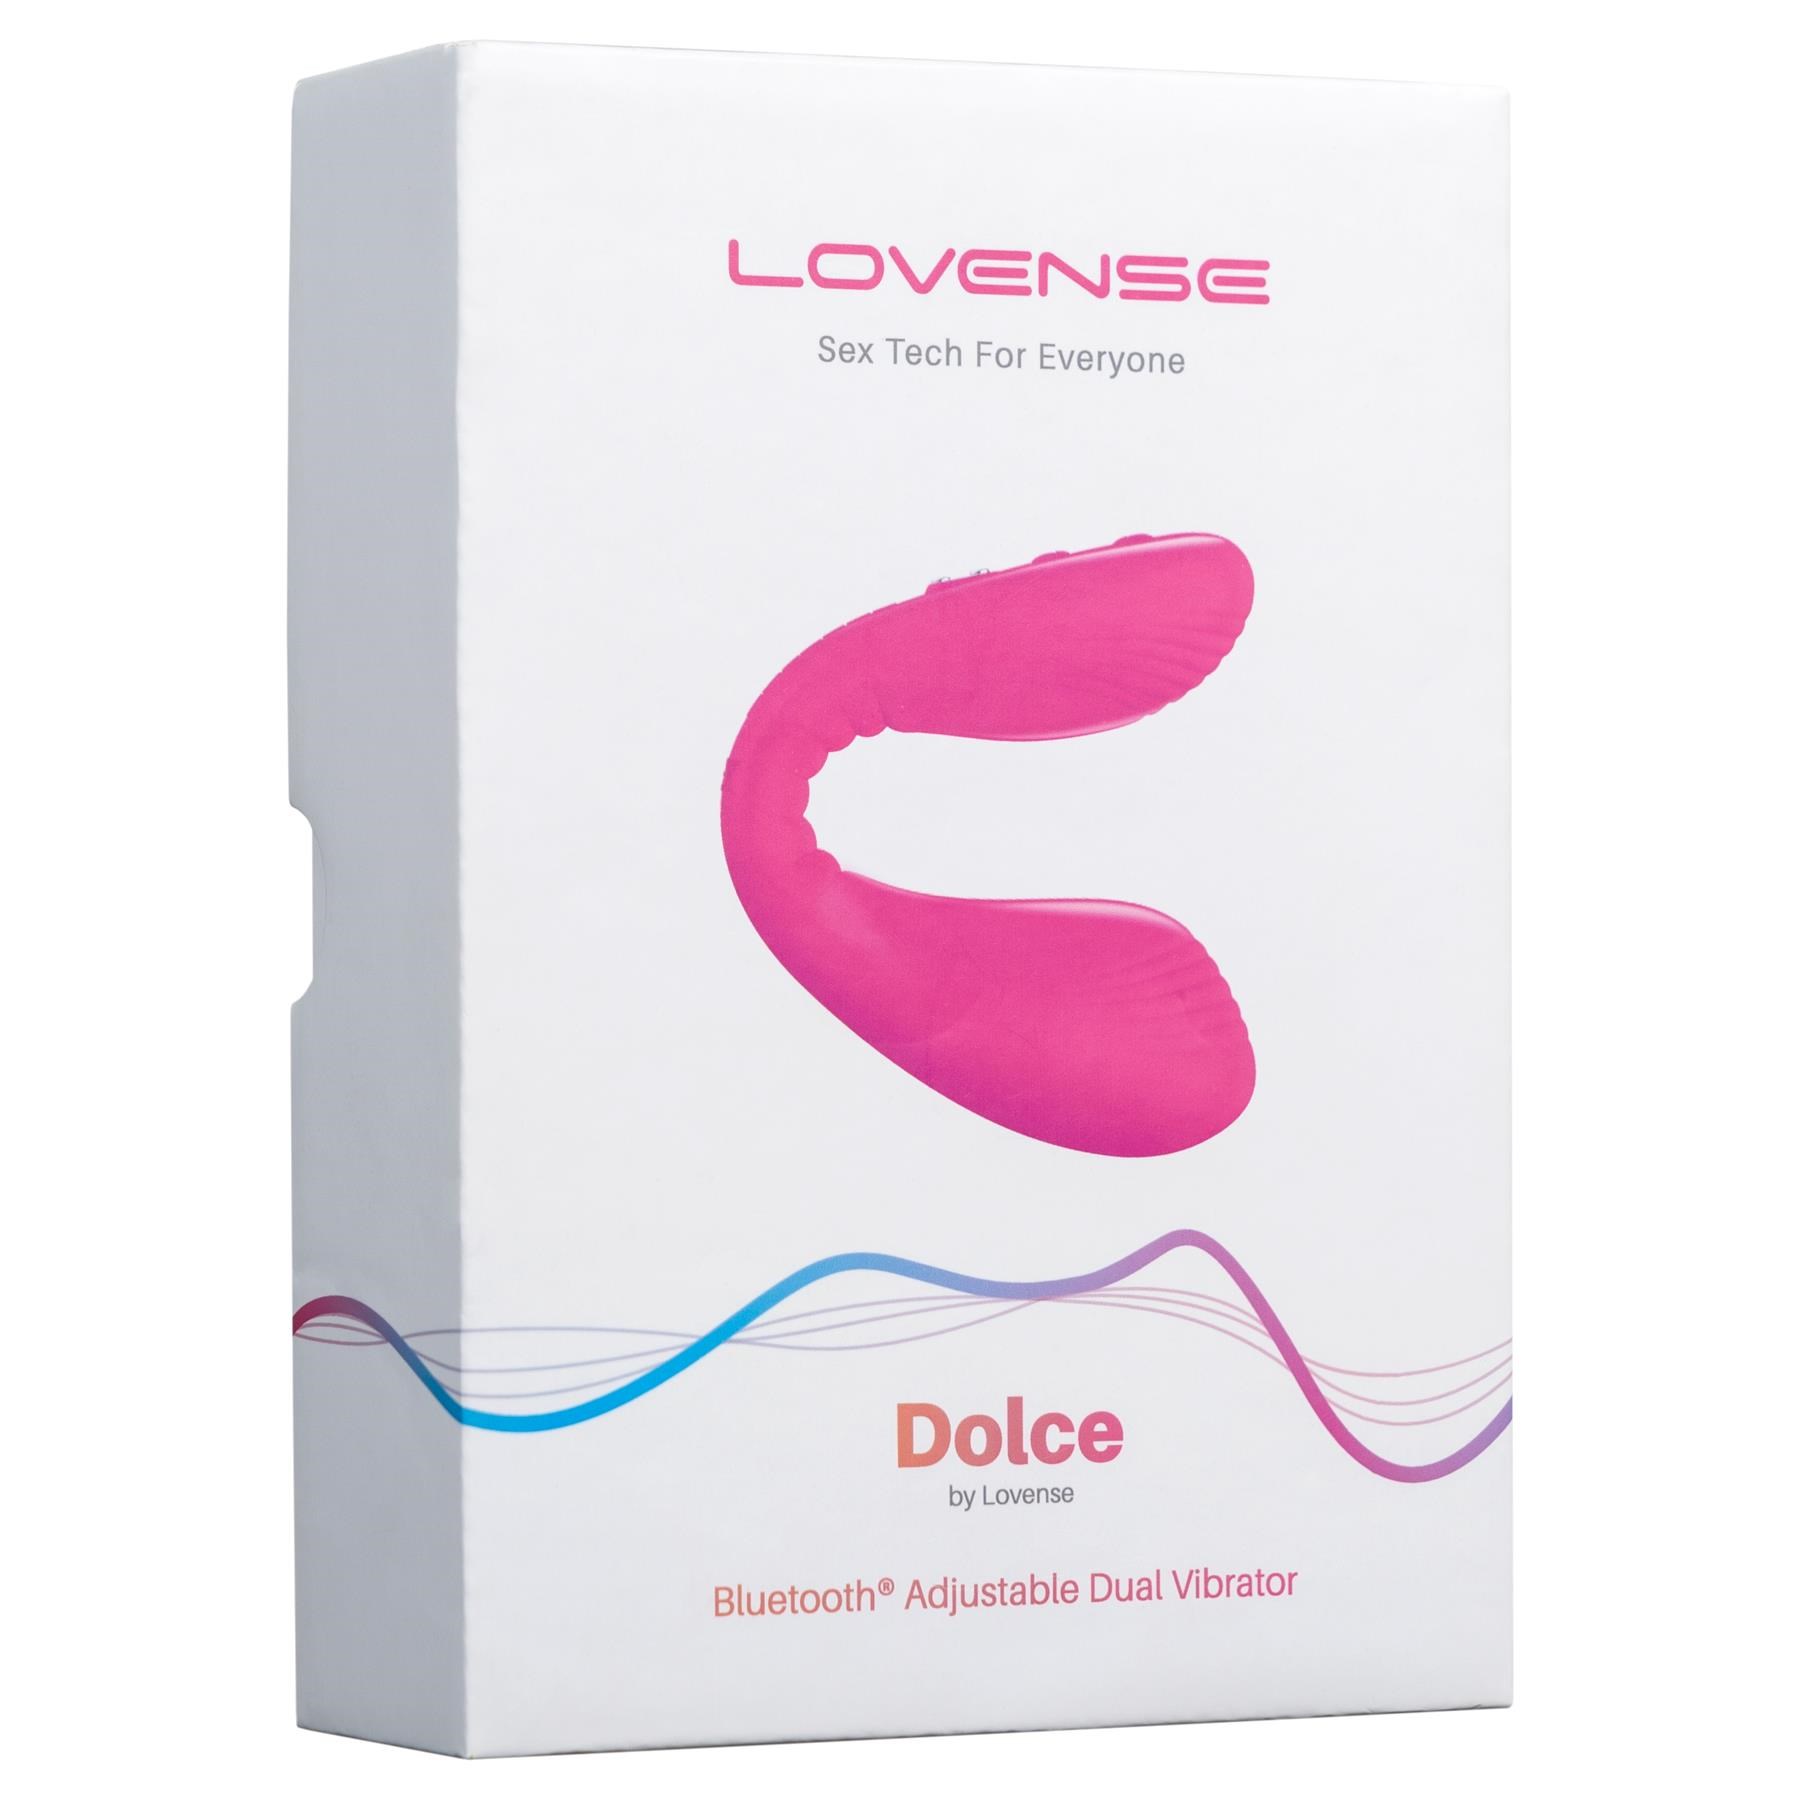 Lovense Dolce Bluetooth Dual Vibrator - Packaging